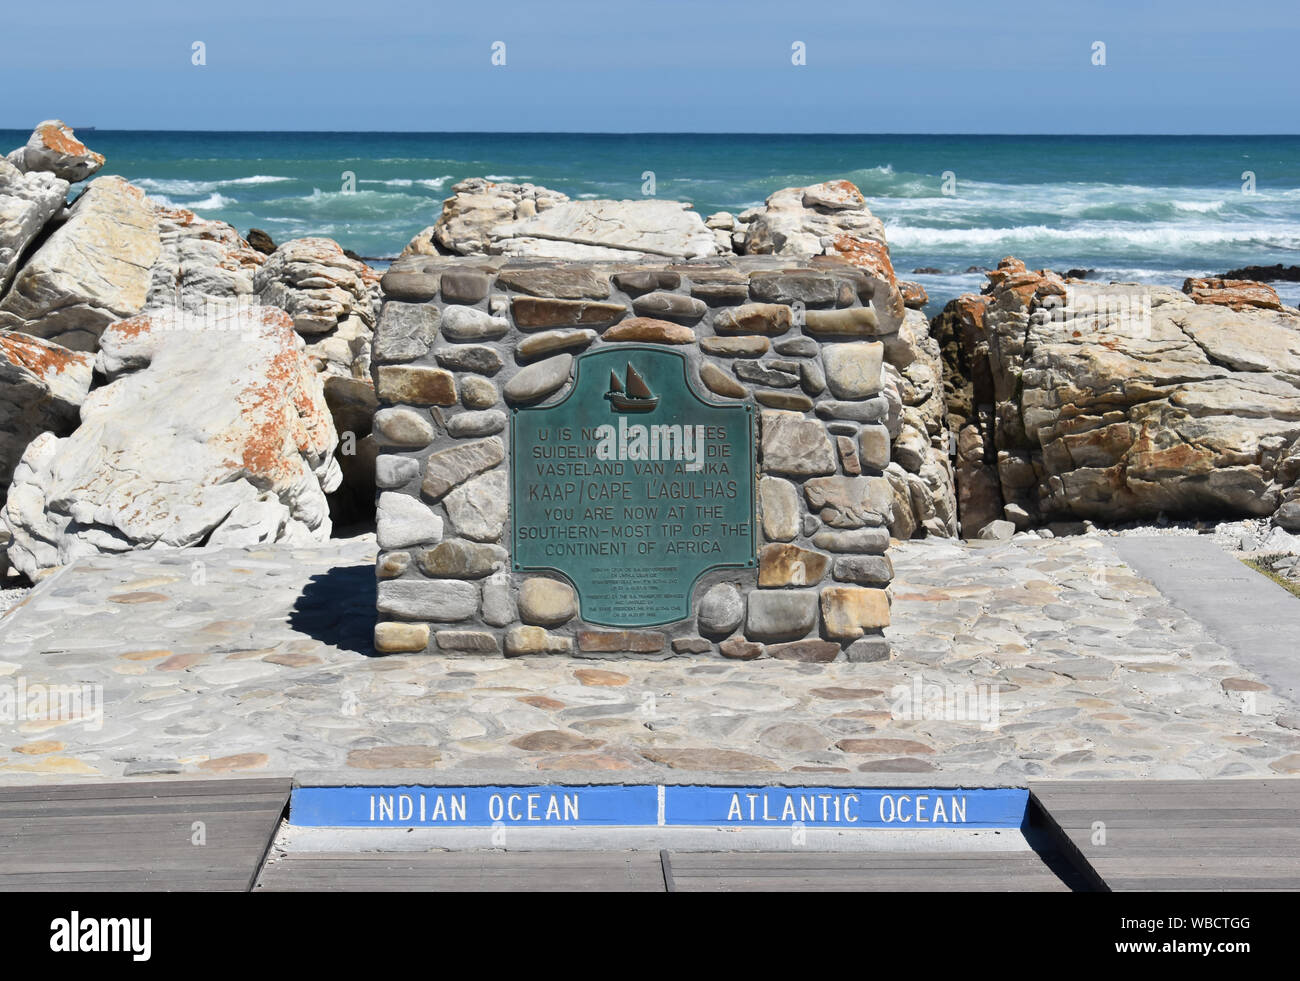 Cape agulhas south africa people hi-res images - Alamy